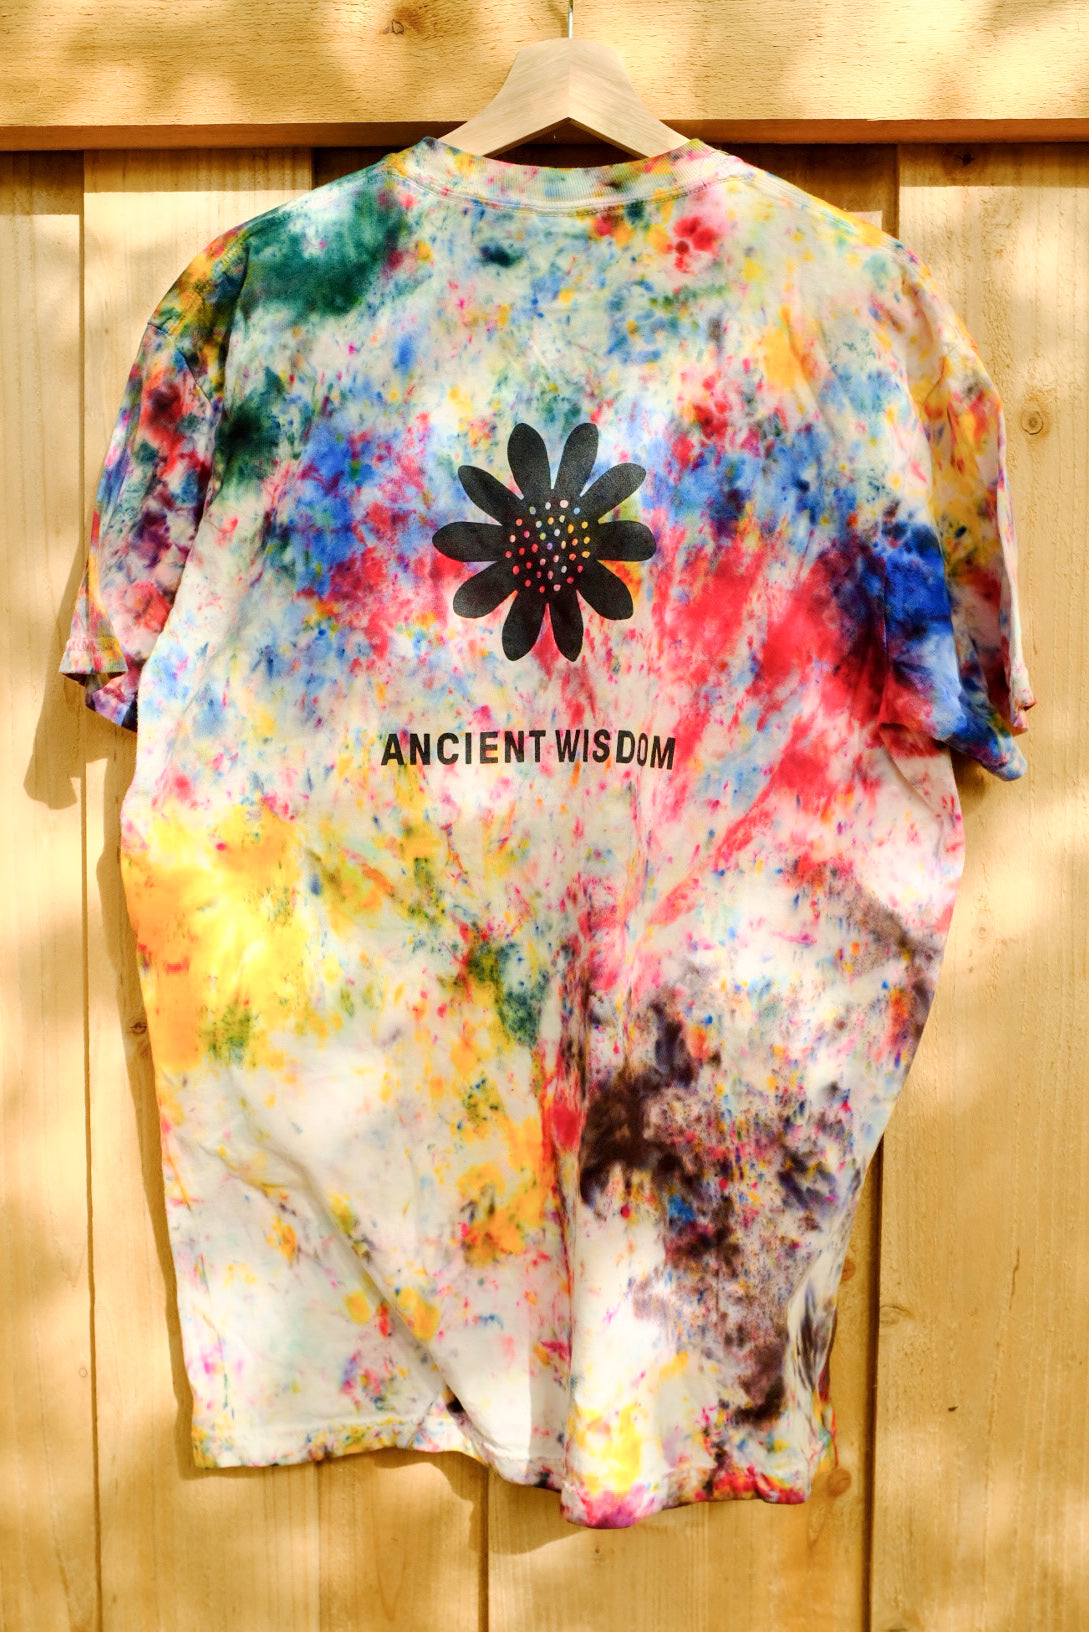 Tie-dye style shirt with "Ancient Wisdom" printed in black text underneath a black illustration of a sunflower. The shirt is hanging on a wooden hanger in front of a wooden fence.